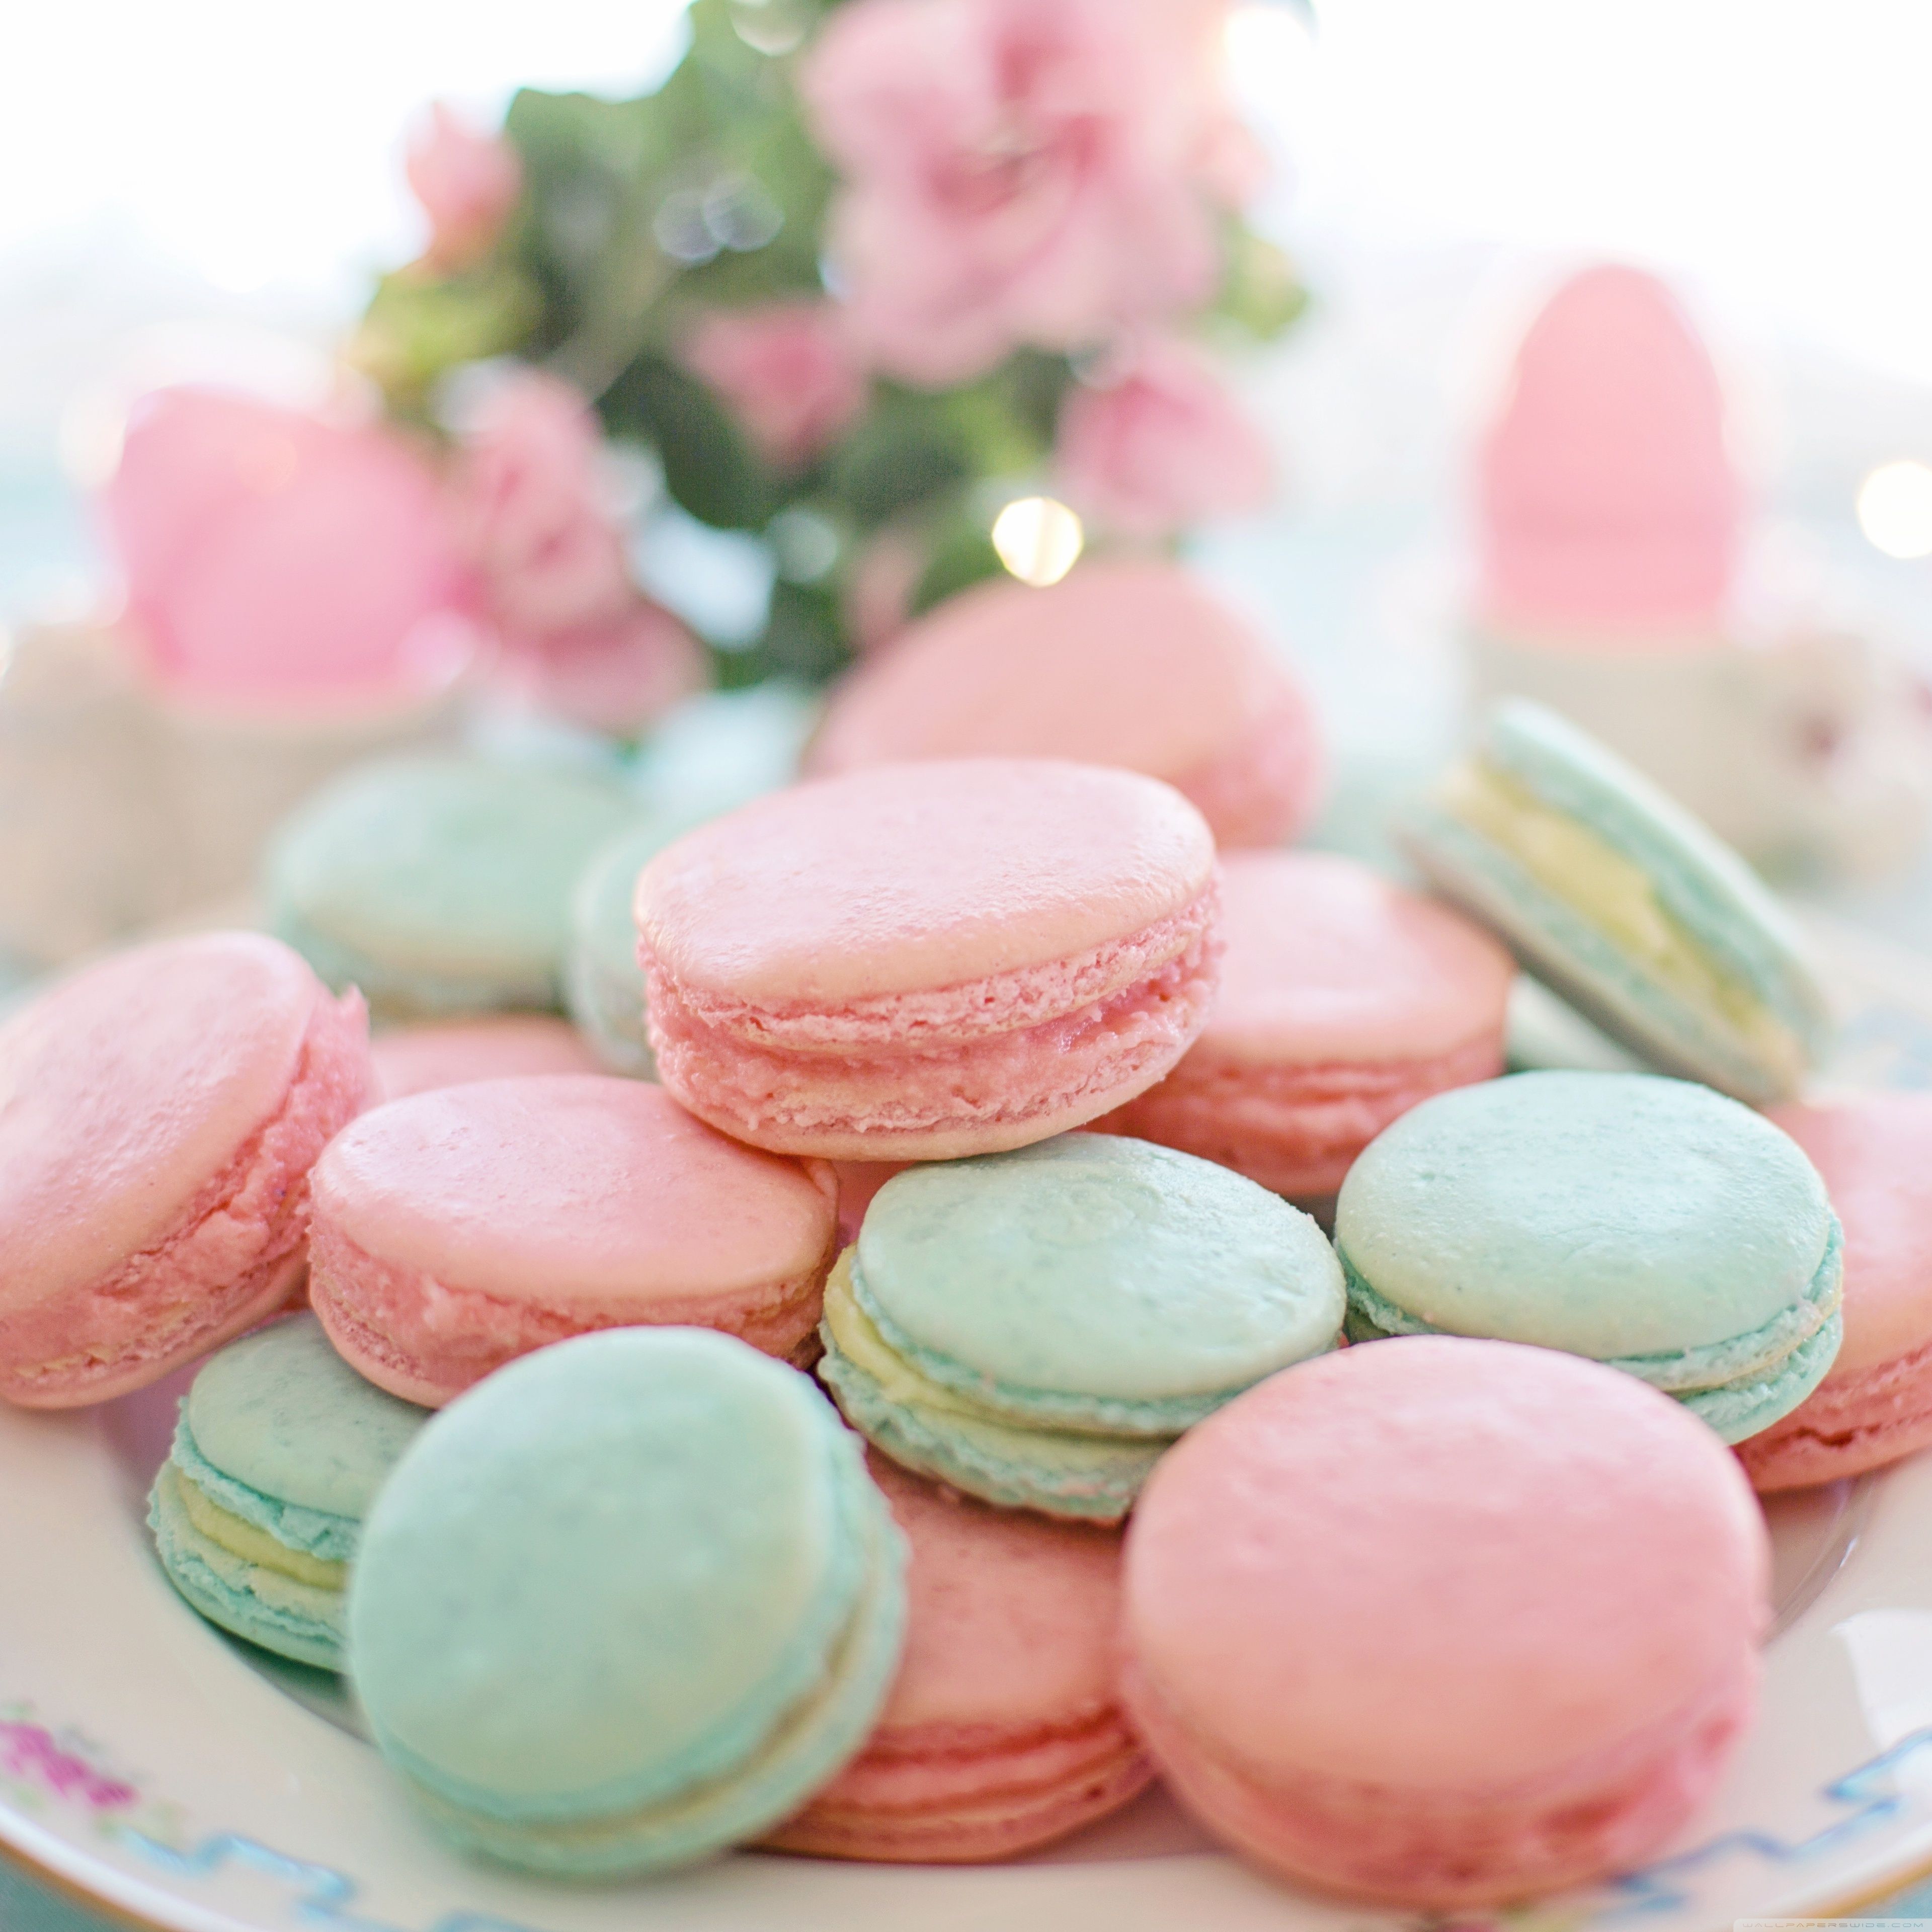 A plate of pink and blue macaroons - Food, bakery, pastel